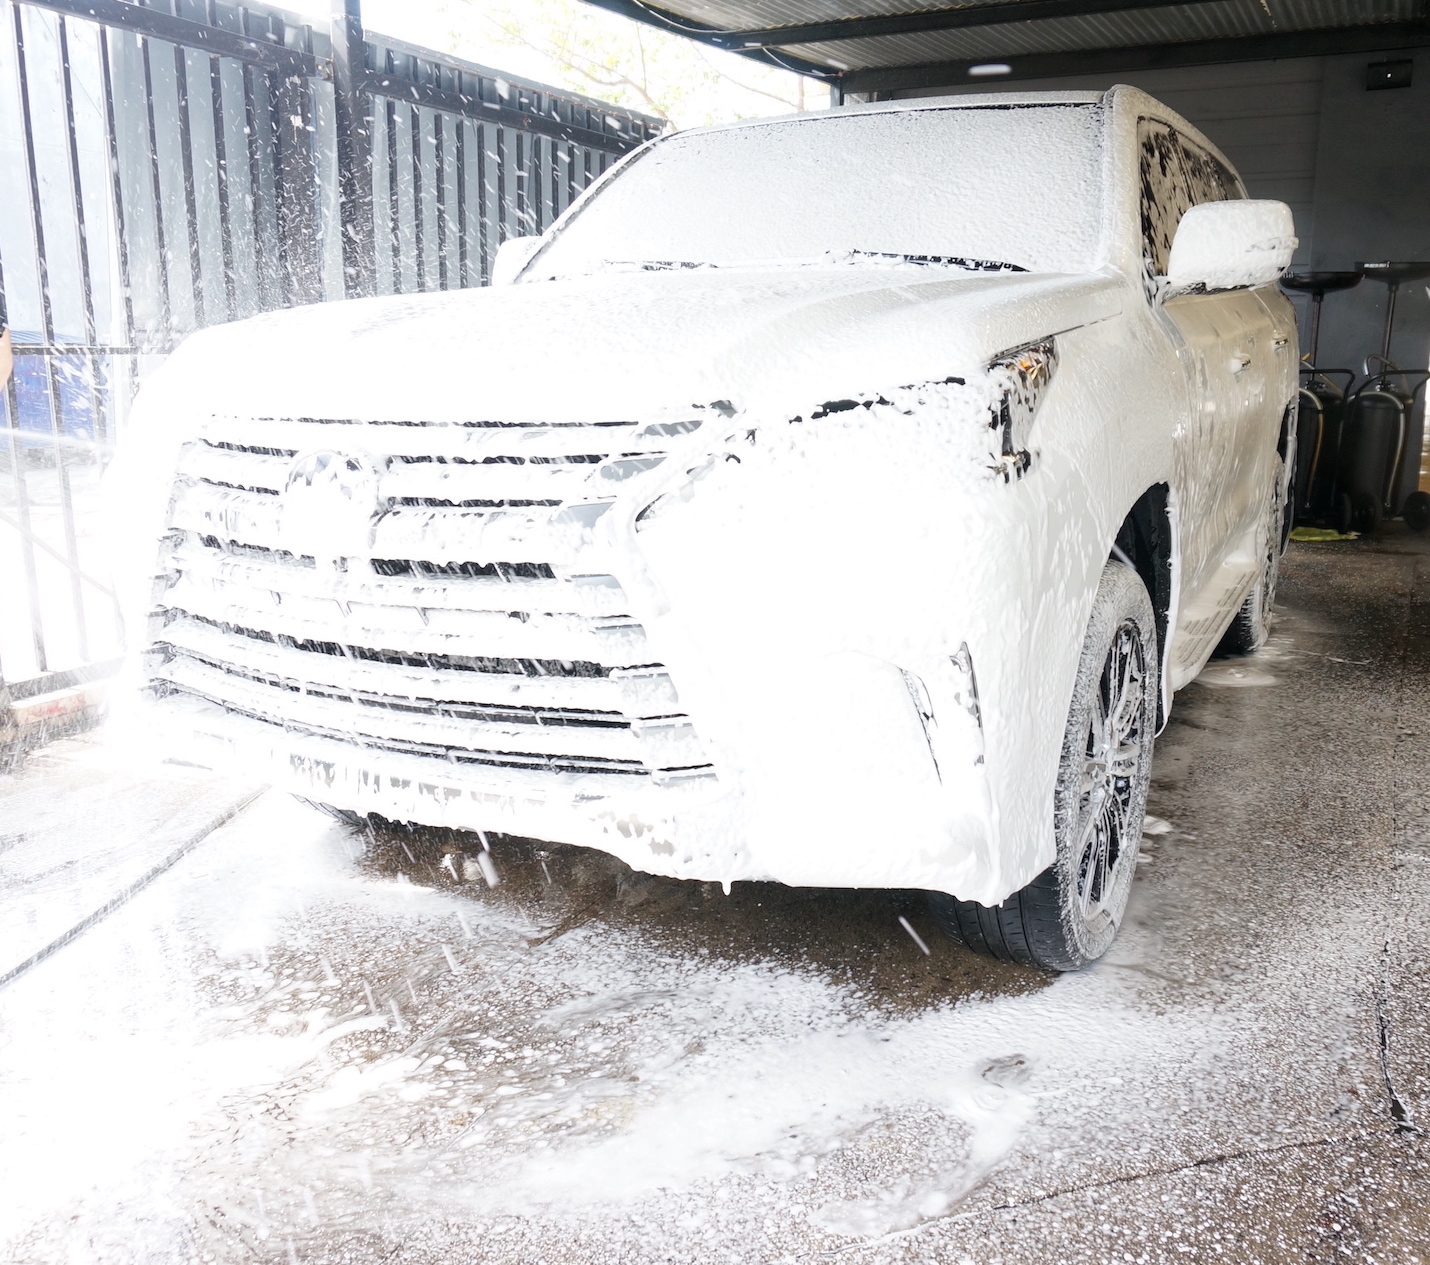 Lexus LX580 soaked in Shampoo suds from the foam cannon.